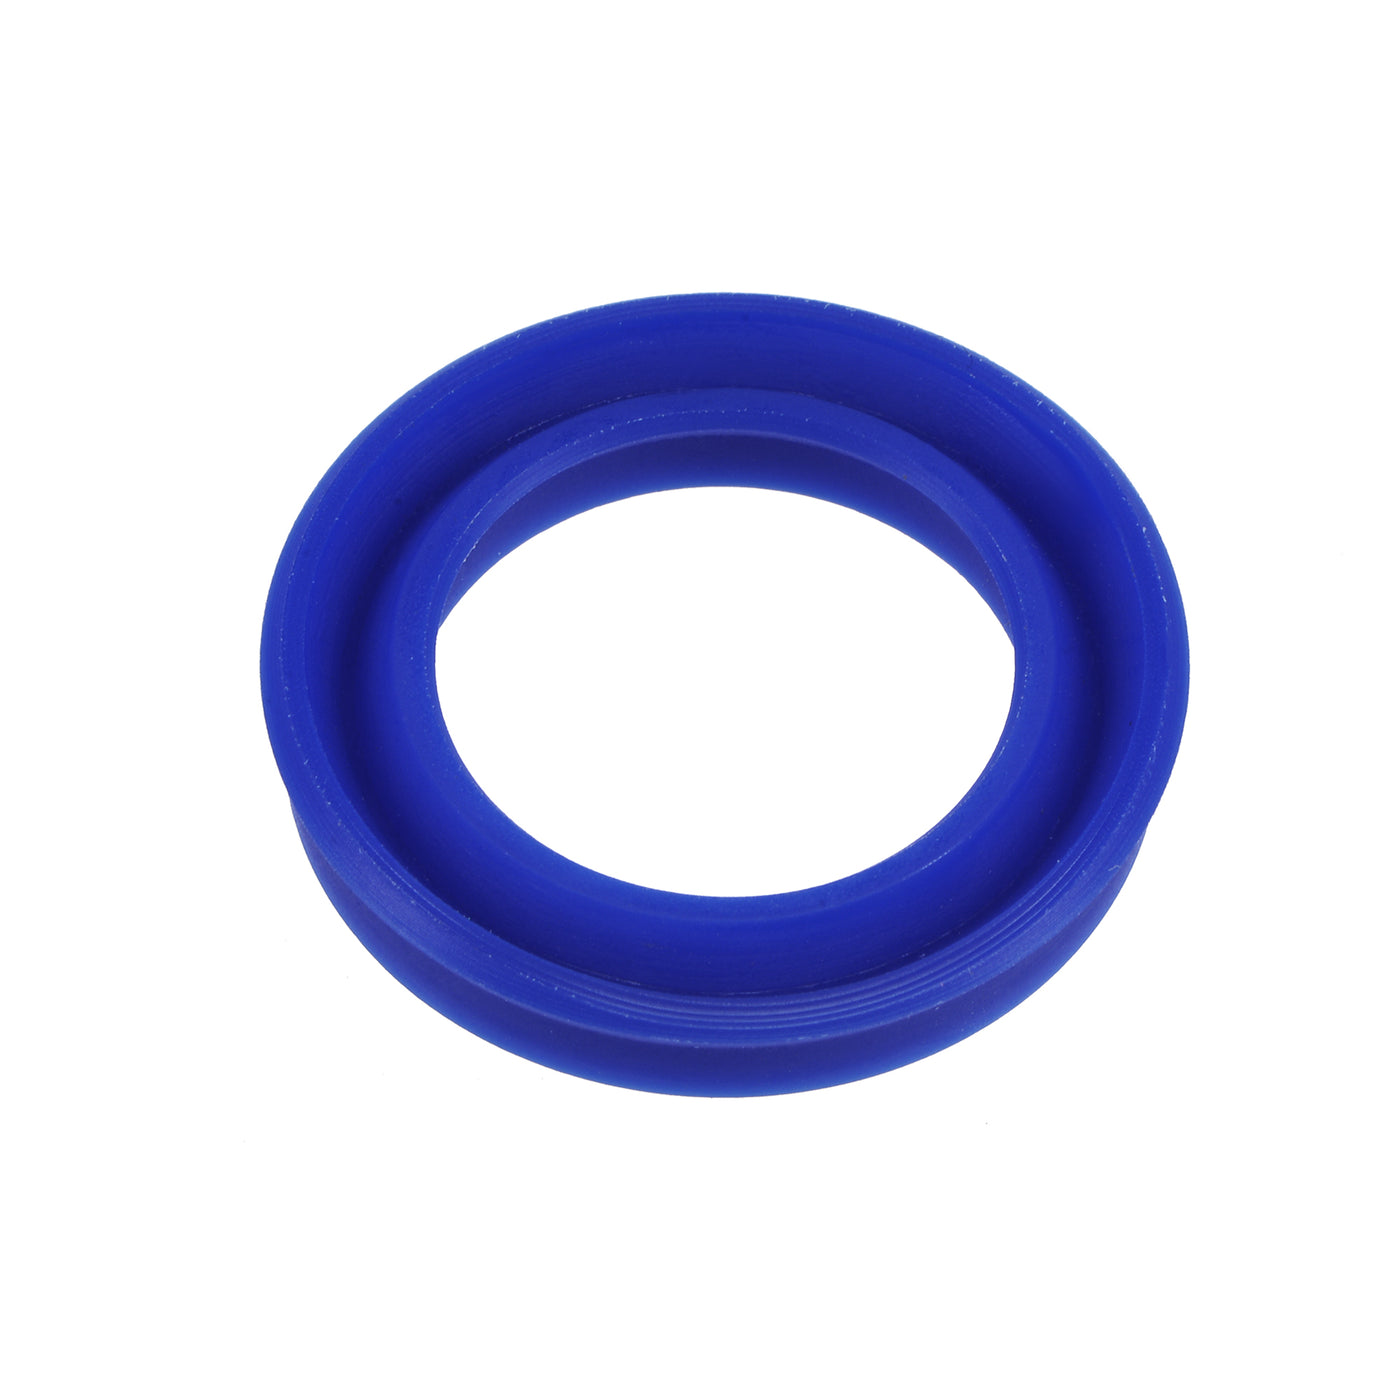 uxcell Uxcell UHS Radial Shaft Seal 18mm ID x 26mm OD x 5mm Width PU Oil Seal, Blue Pack of 5